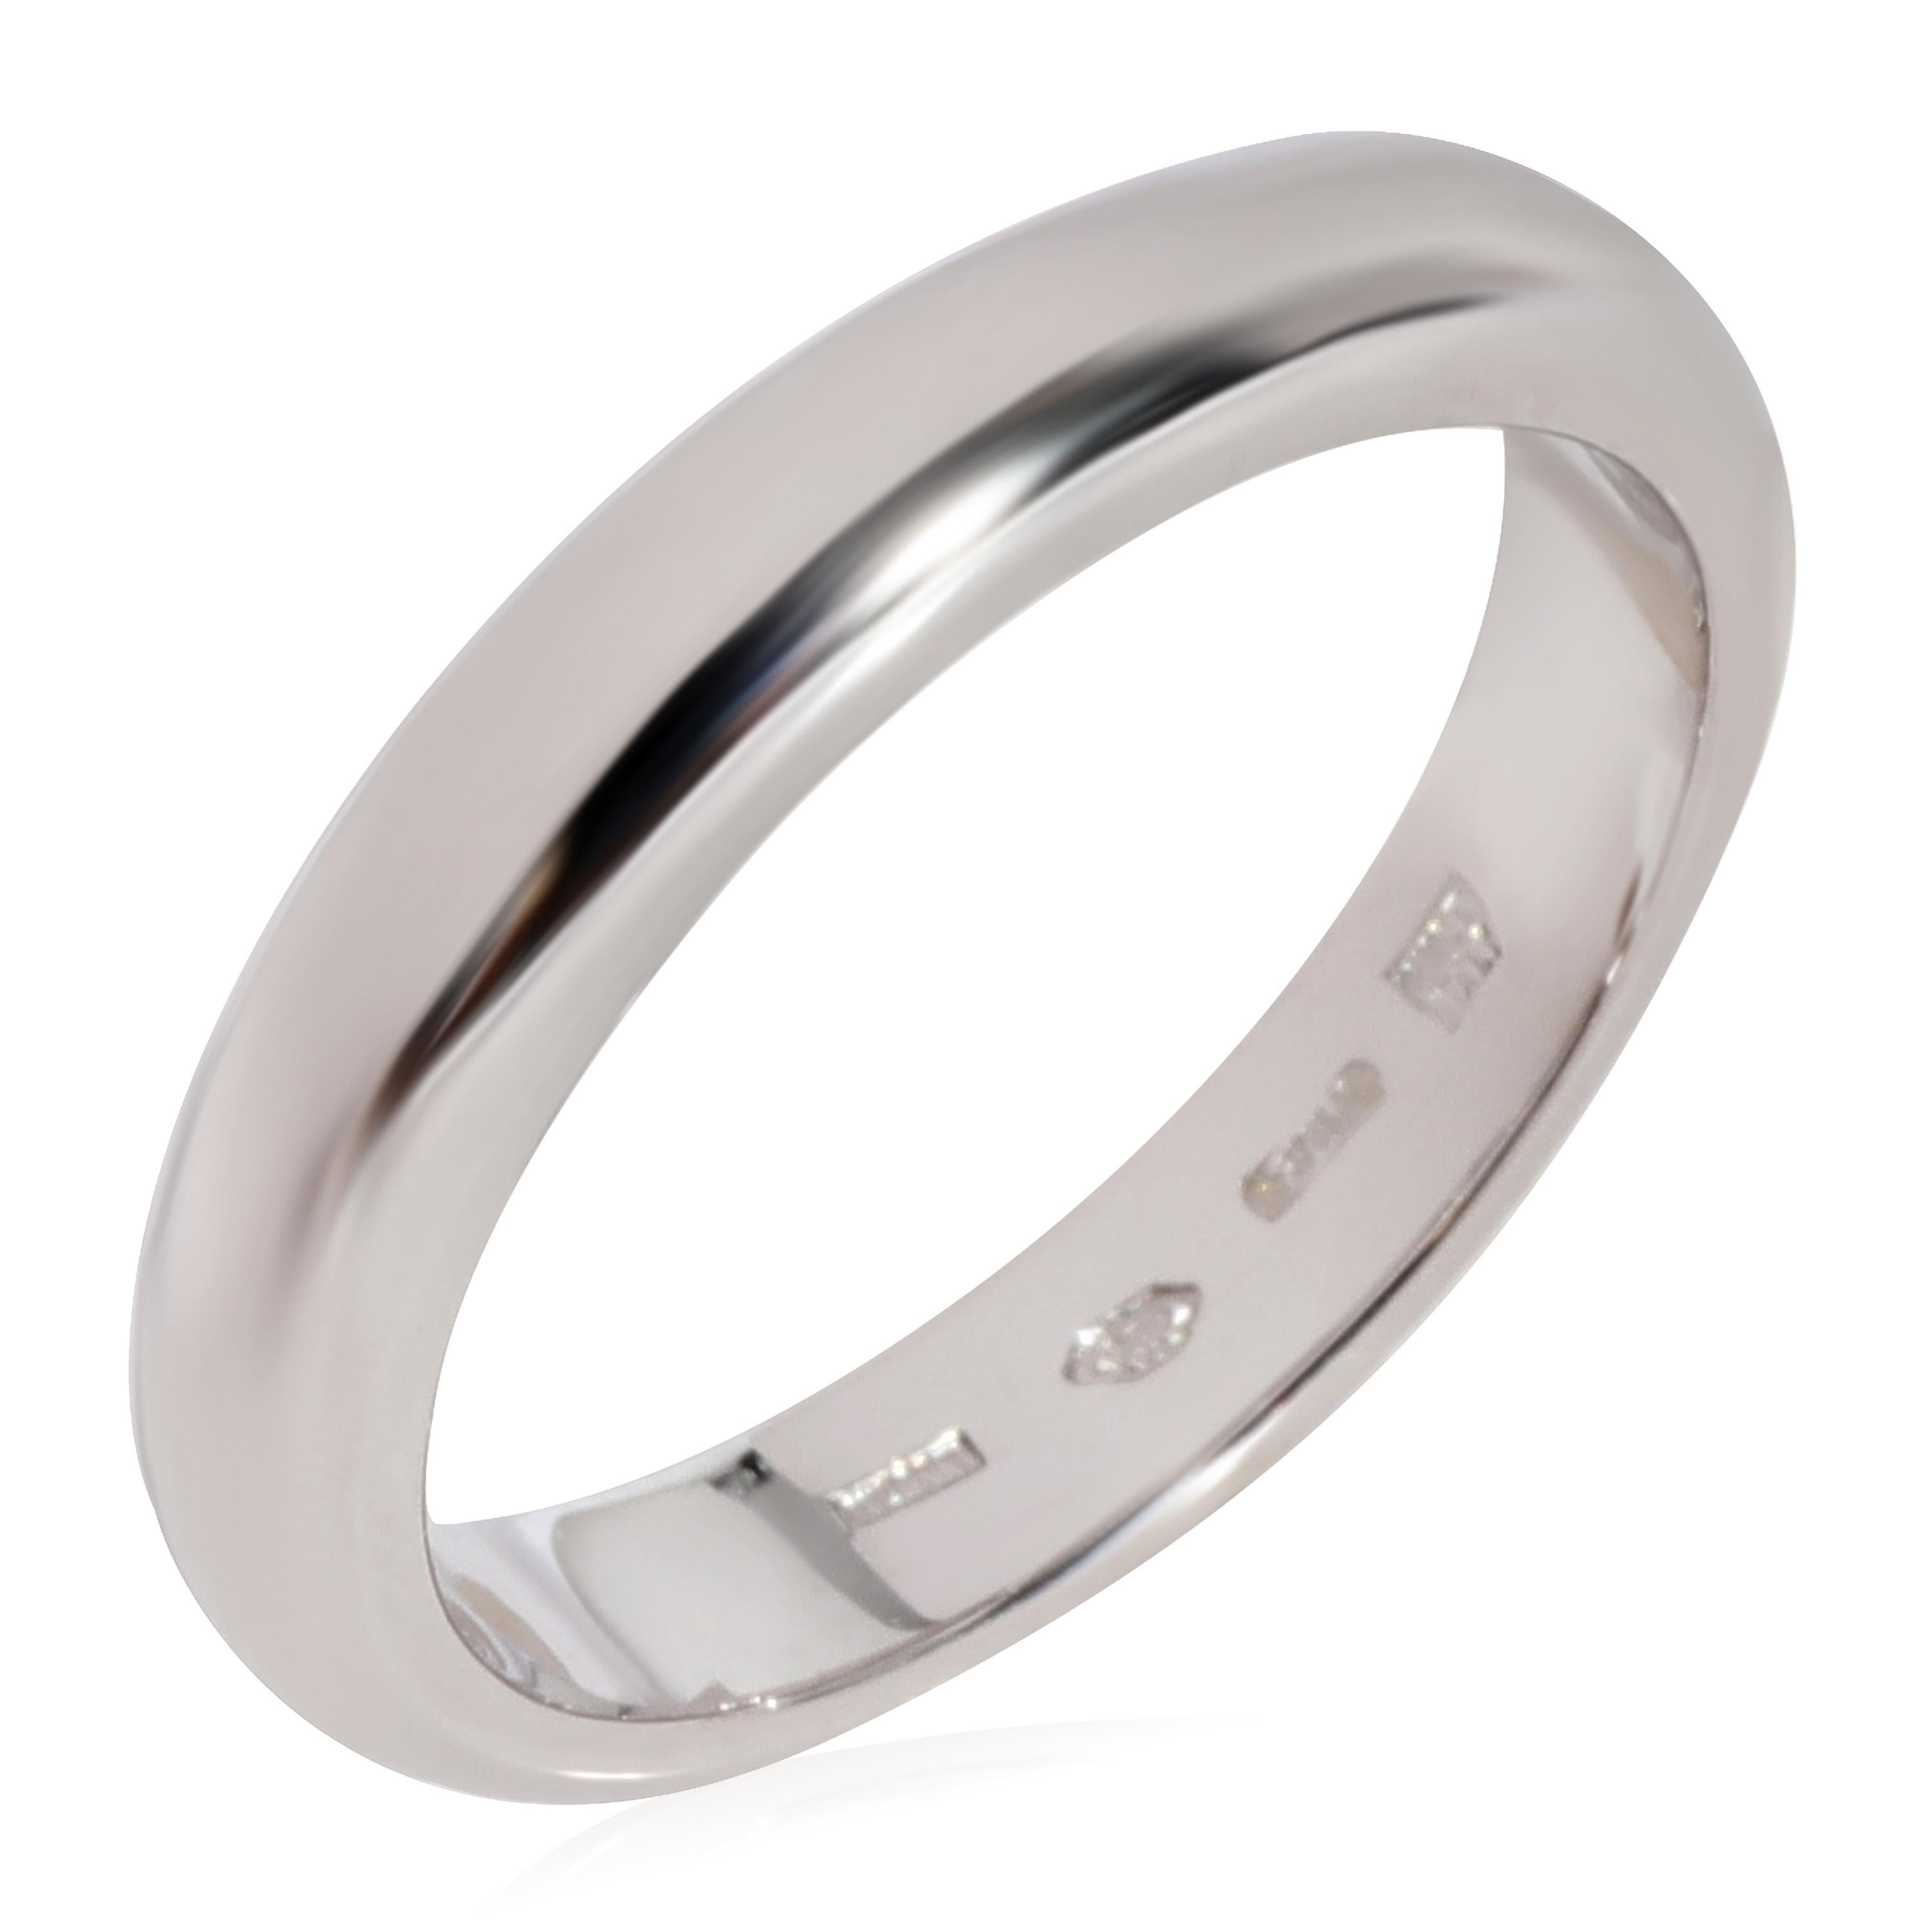 BVLGARI FEDI Wedding Band in 950 Platinum

PRIMARY DETAILS
SKU: 125081
Listing Title: BVLGARI FEDI Wedding Band in 950 Platinum
Condition Description: Retails for 2230 USD. In excellent condition and recently polished. Ring size is 6.25. Comes with